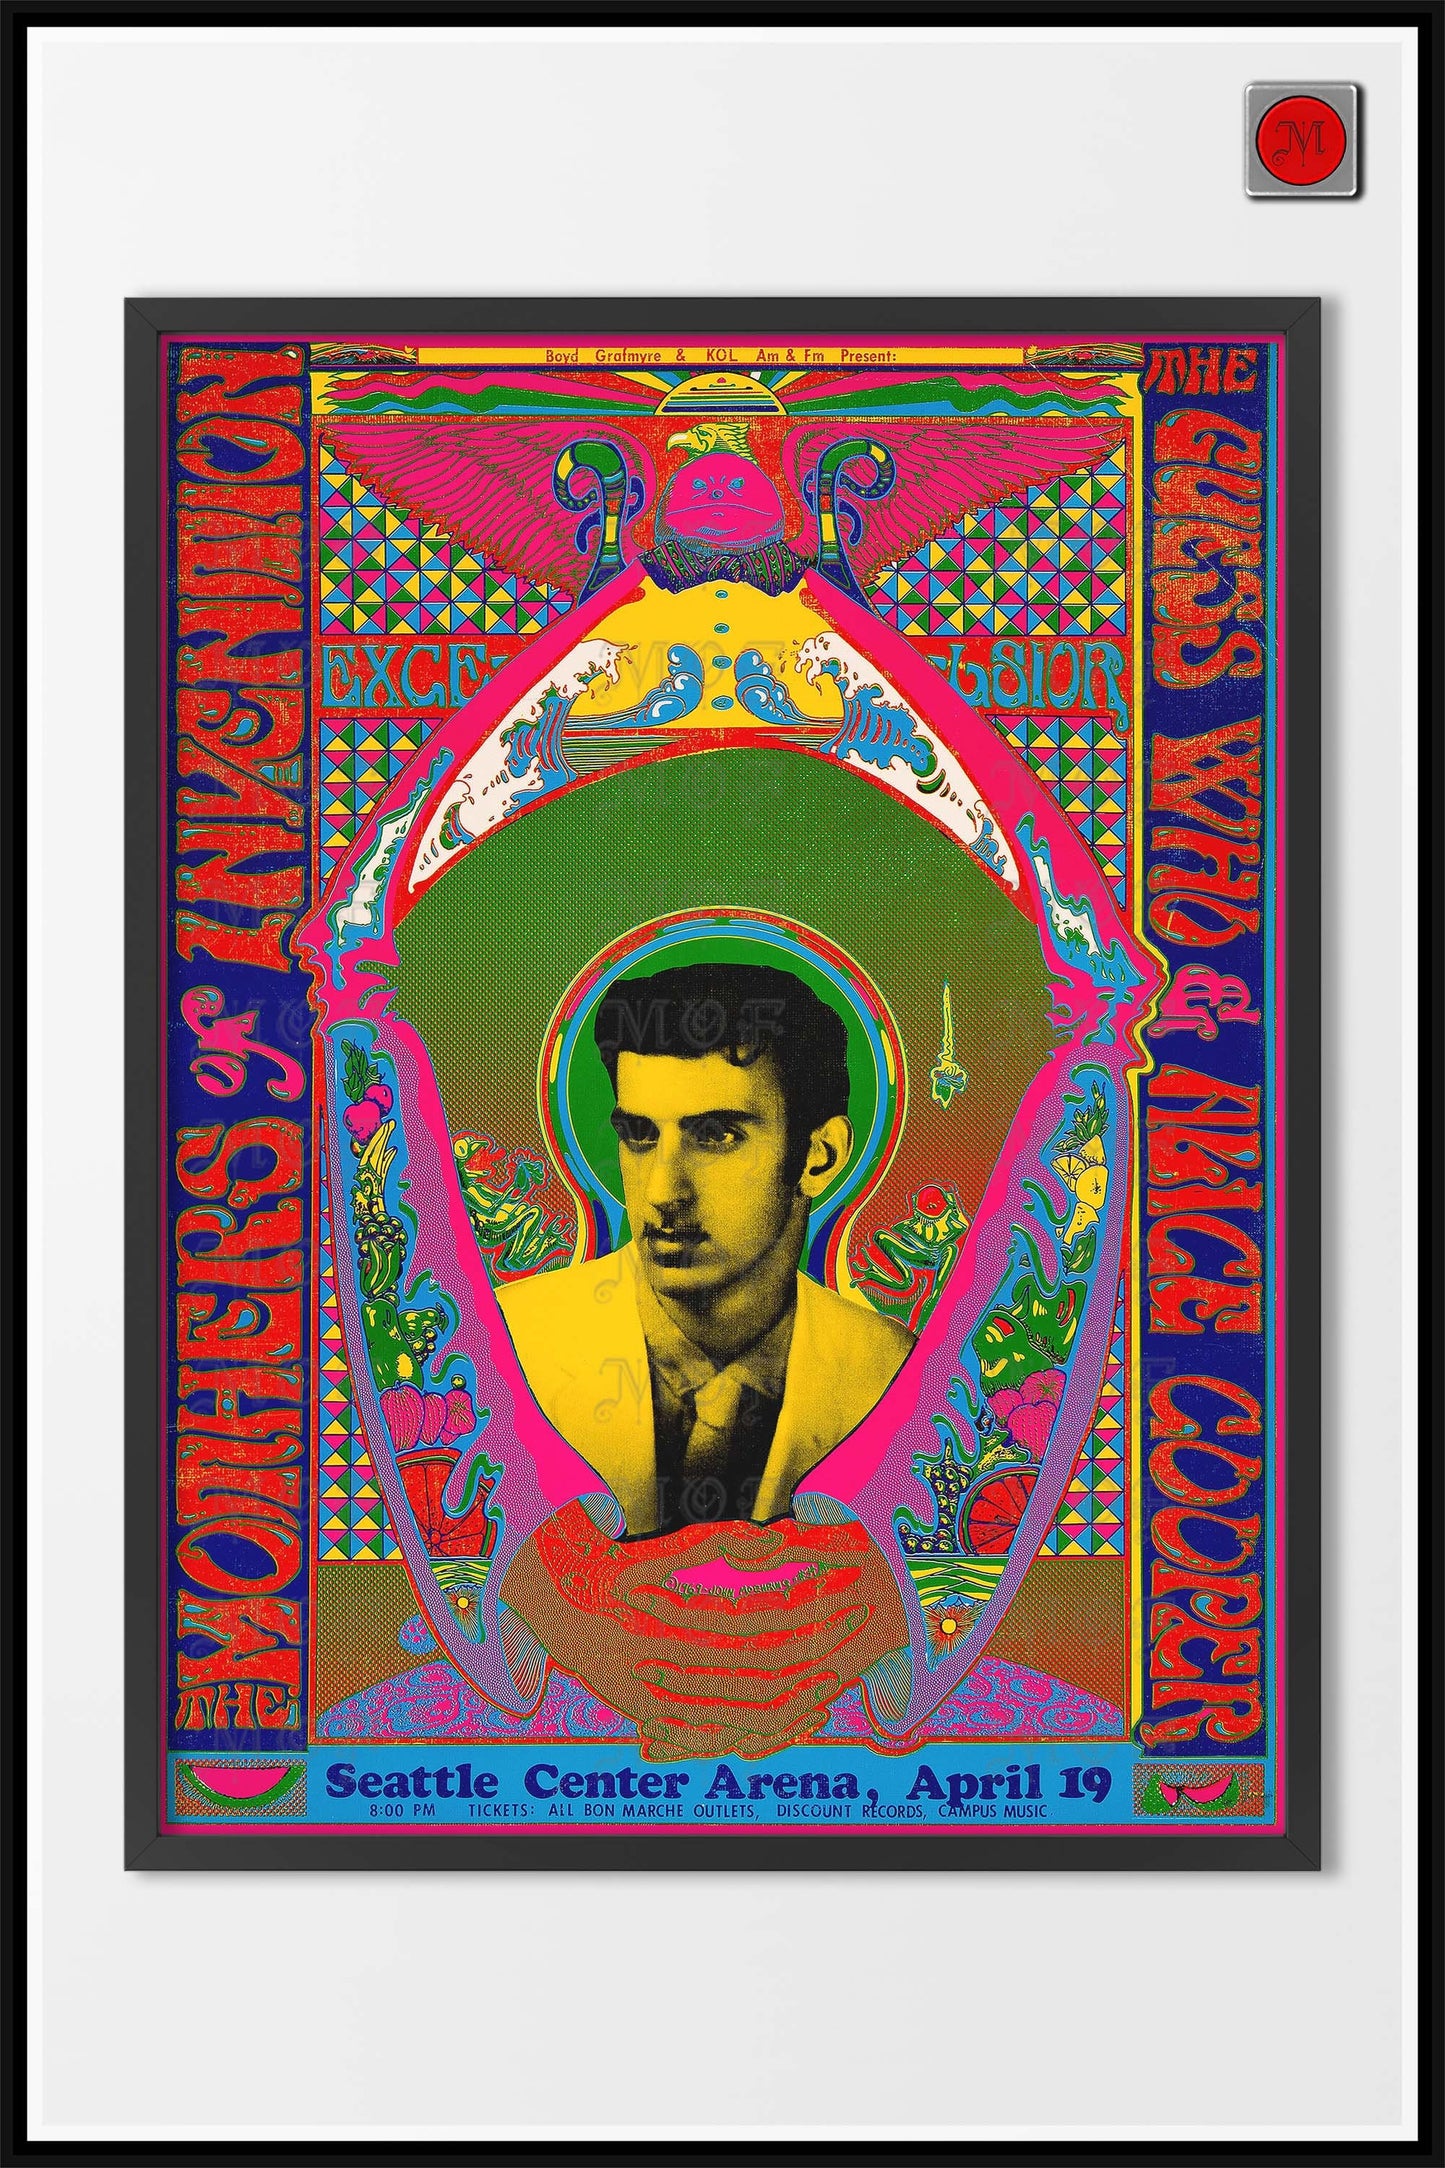 Frank Zappa Psychedelic Concert Poster 1969 REMASTERED